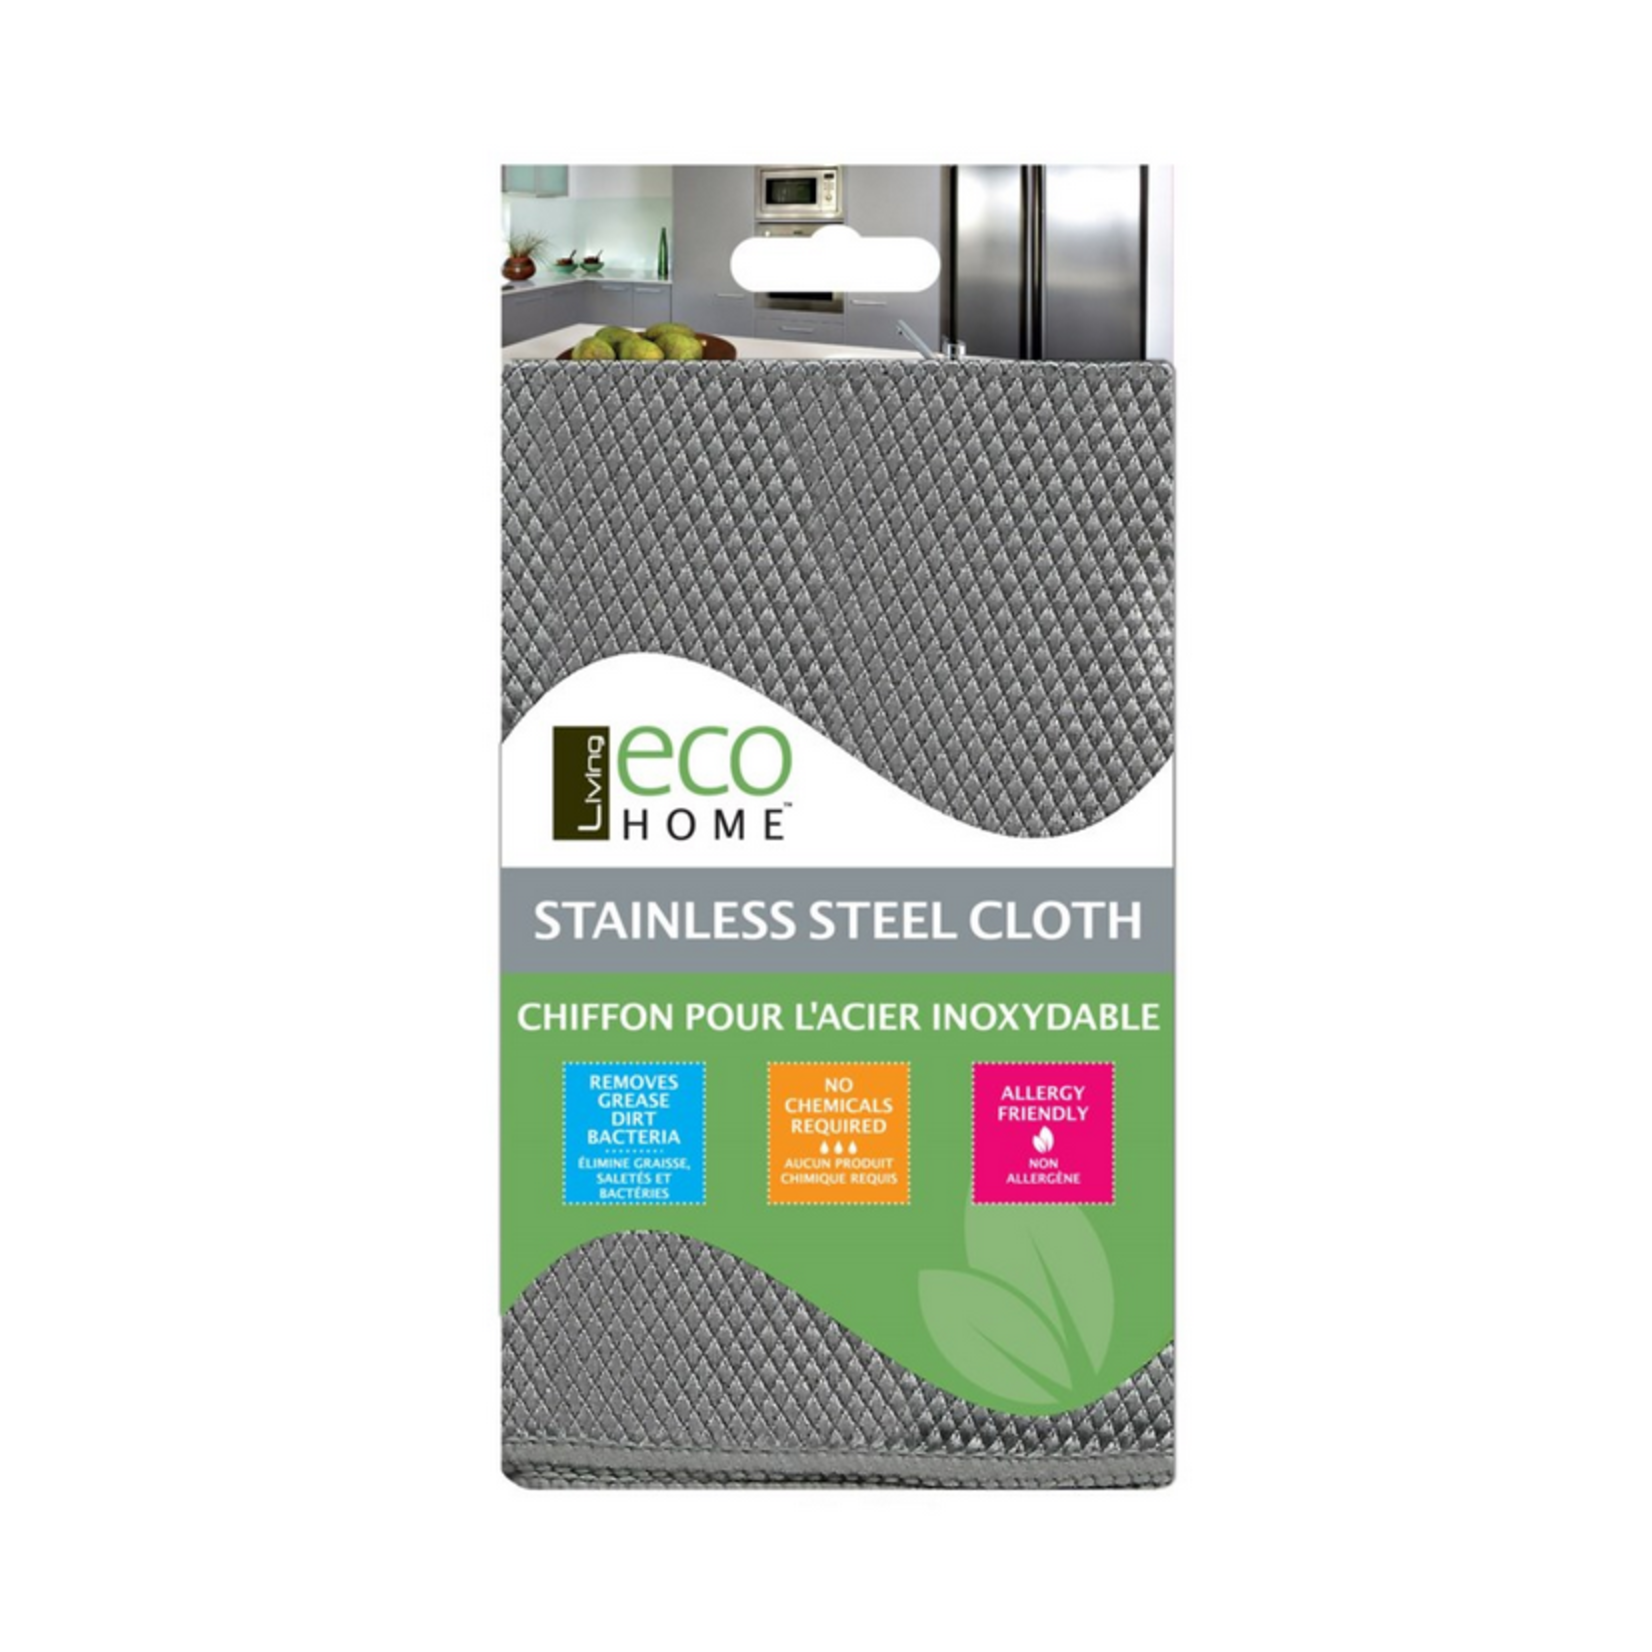 ECO HOME Stainless Steel Cloth